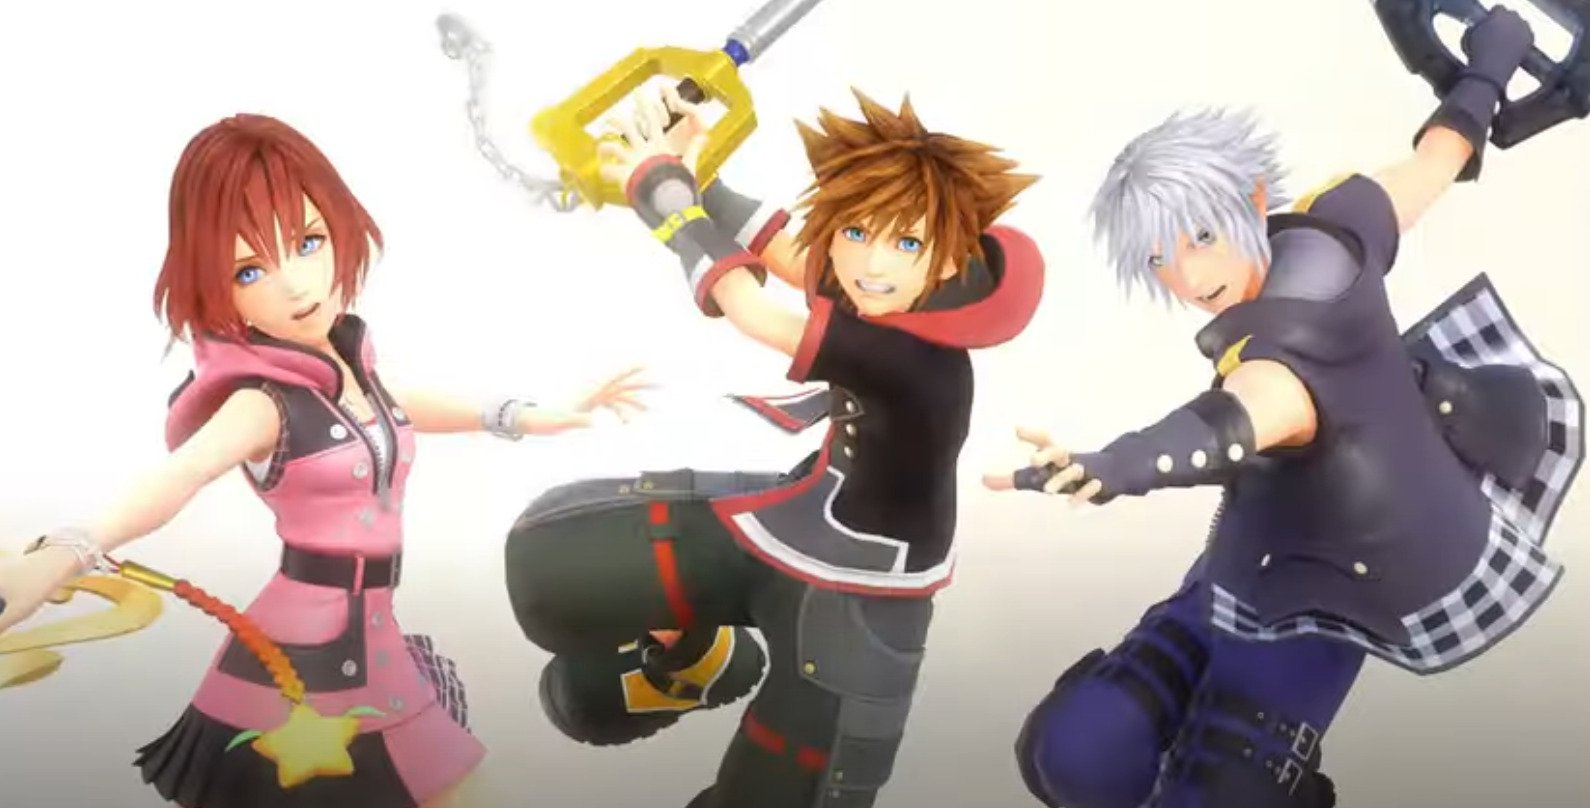 Kingdom Hearts Characters Are Coming To Final Fantasy Brave Exvius For Special Event